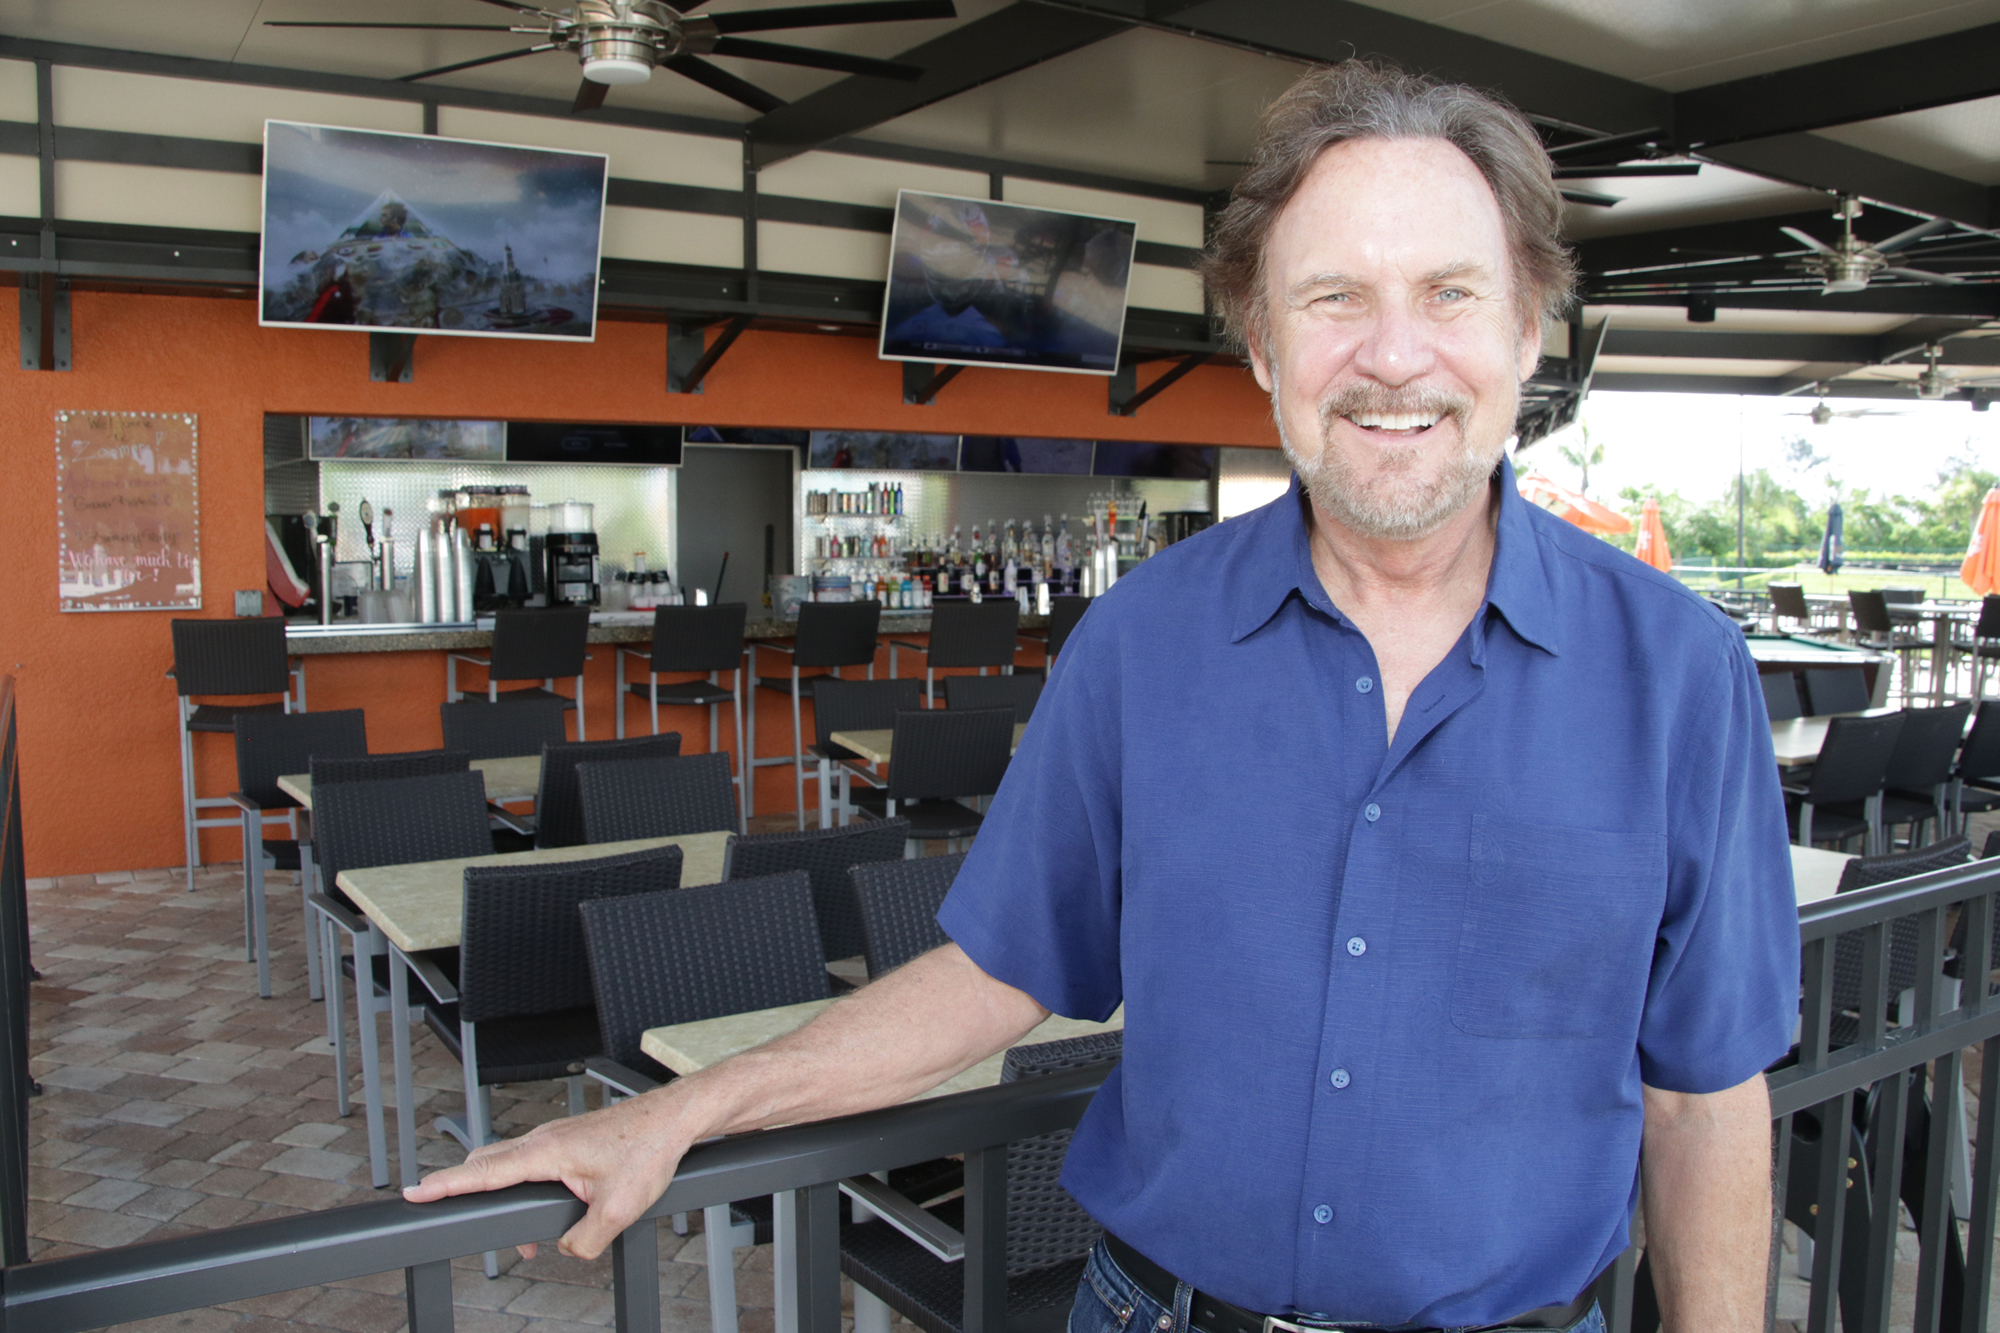 Sidetrack Bar and Grill is the newest addition to Zoomers. Owner Mike Barnes says constant updating is critical to sustaining an amusement park. Jim Jett Photo